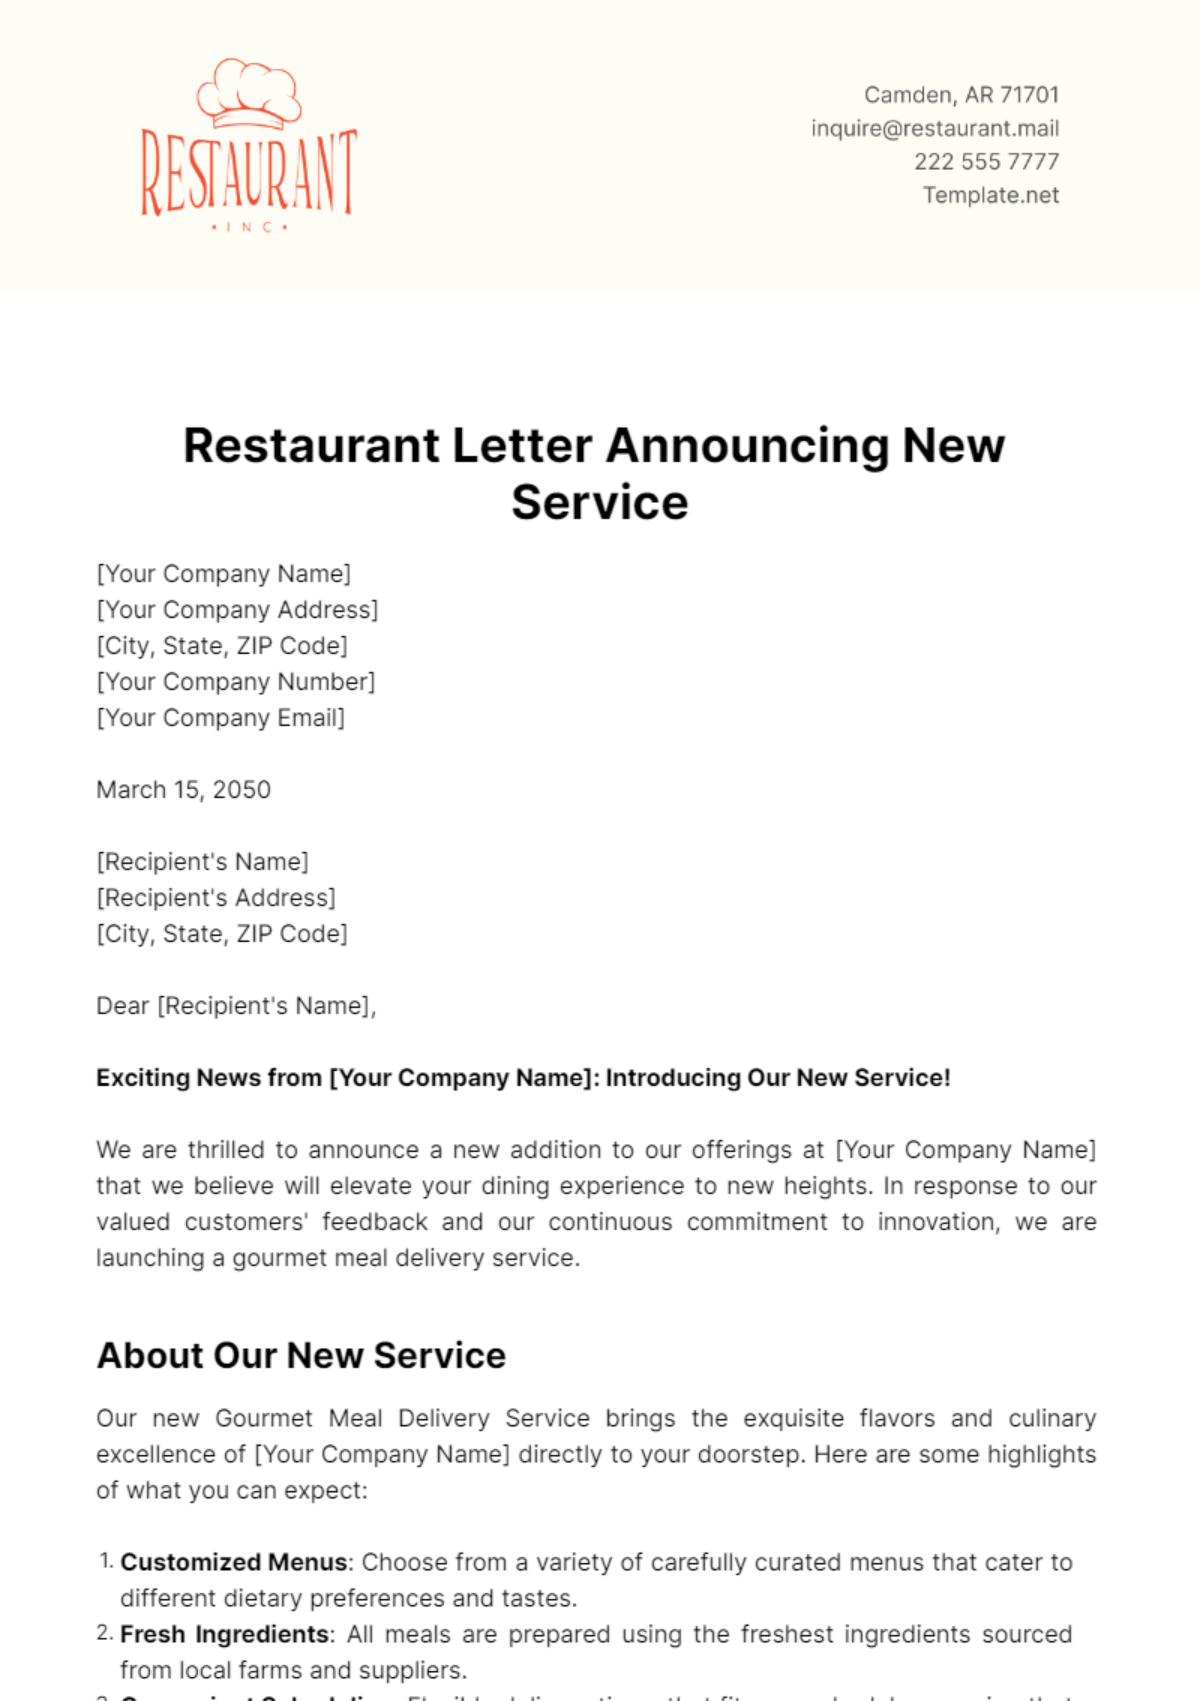 Free Restaurant Letter Announcing New Service Template